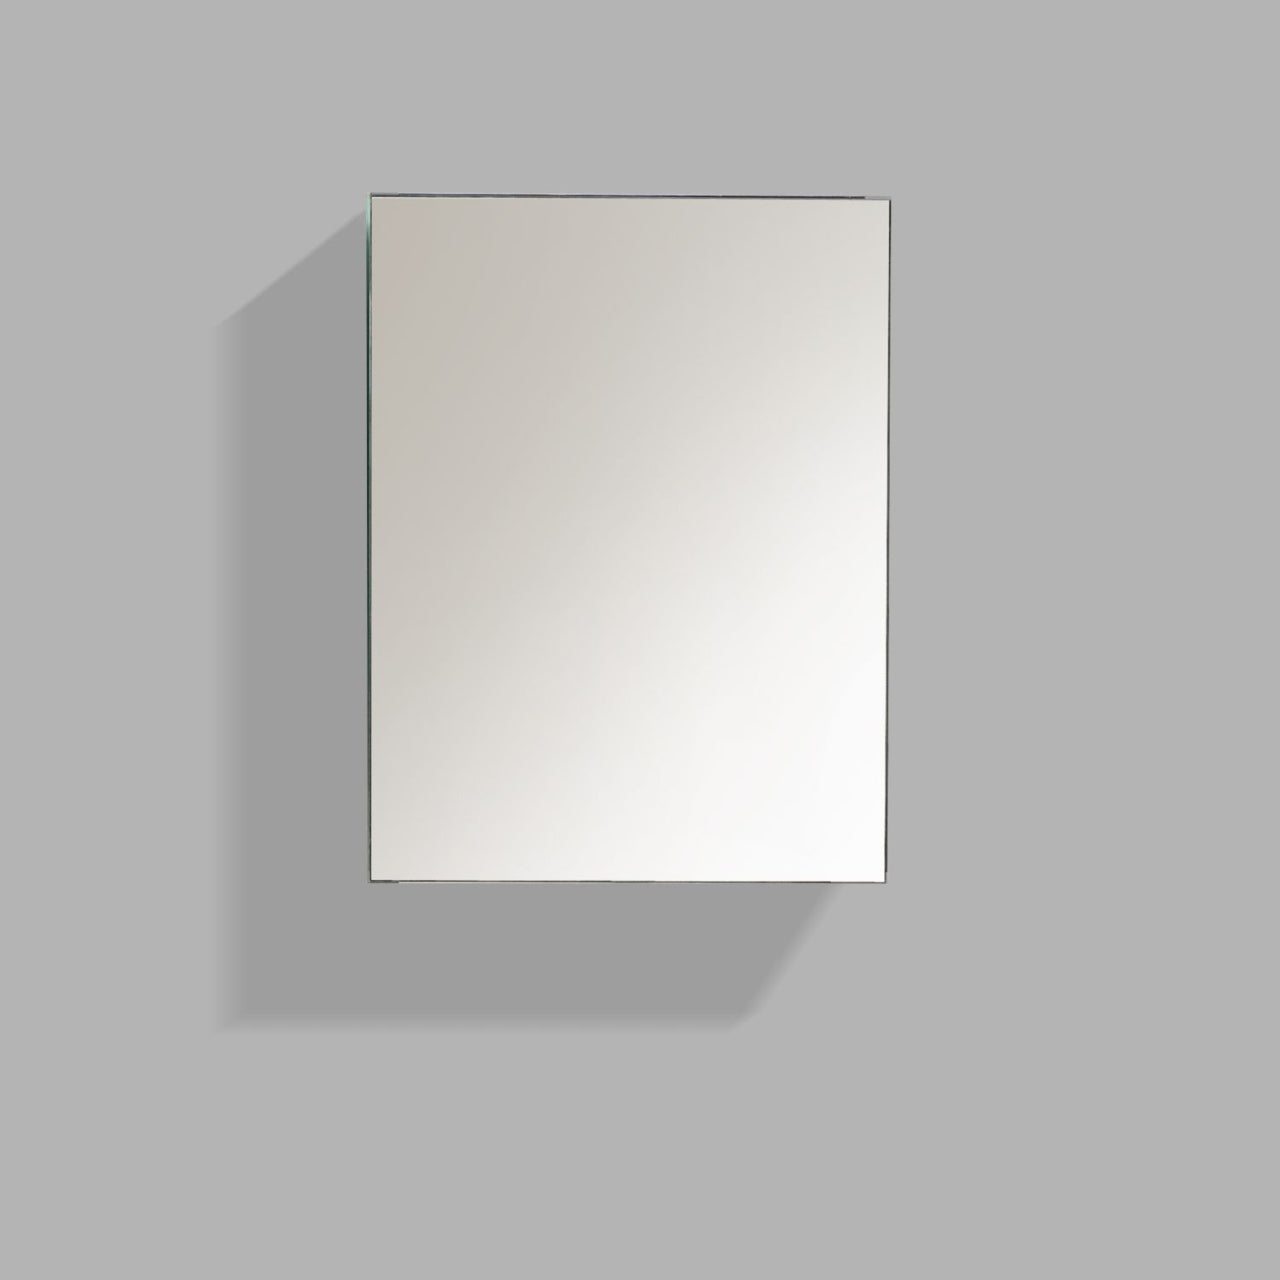 Kube 20" Mirrored Medicine Cabinet - Home and Bath Depot